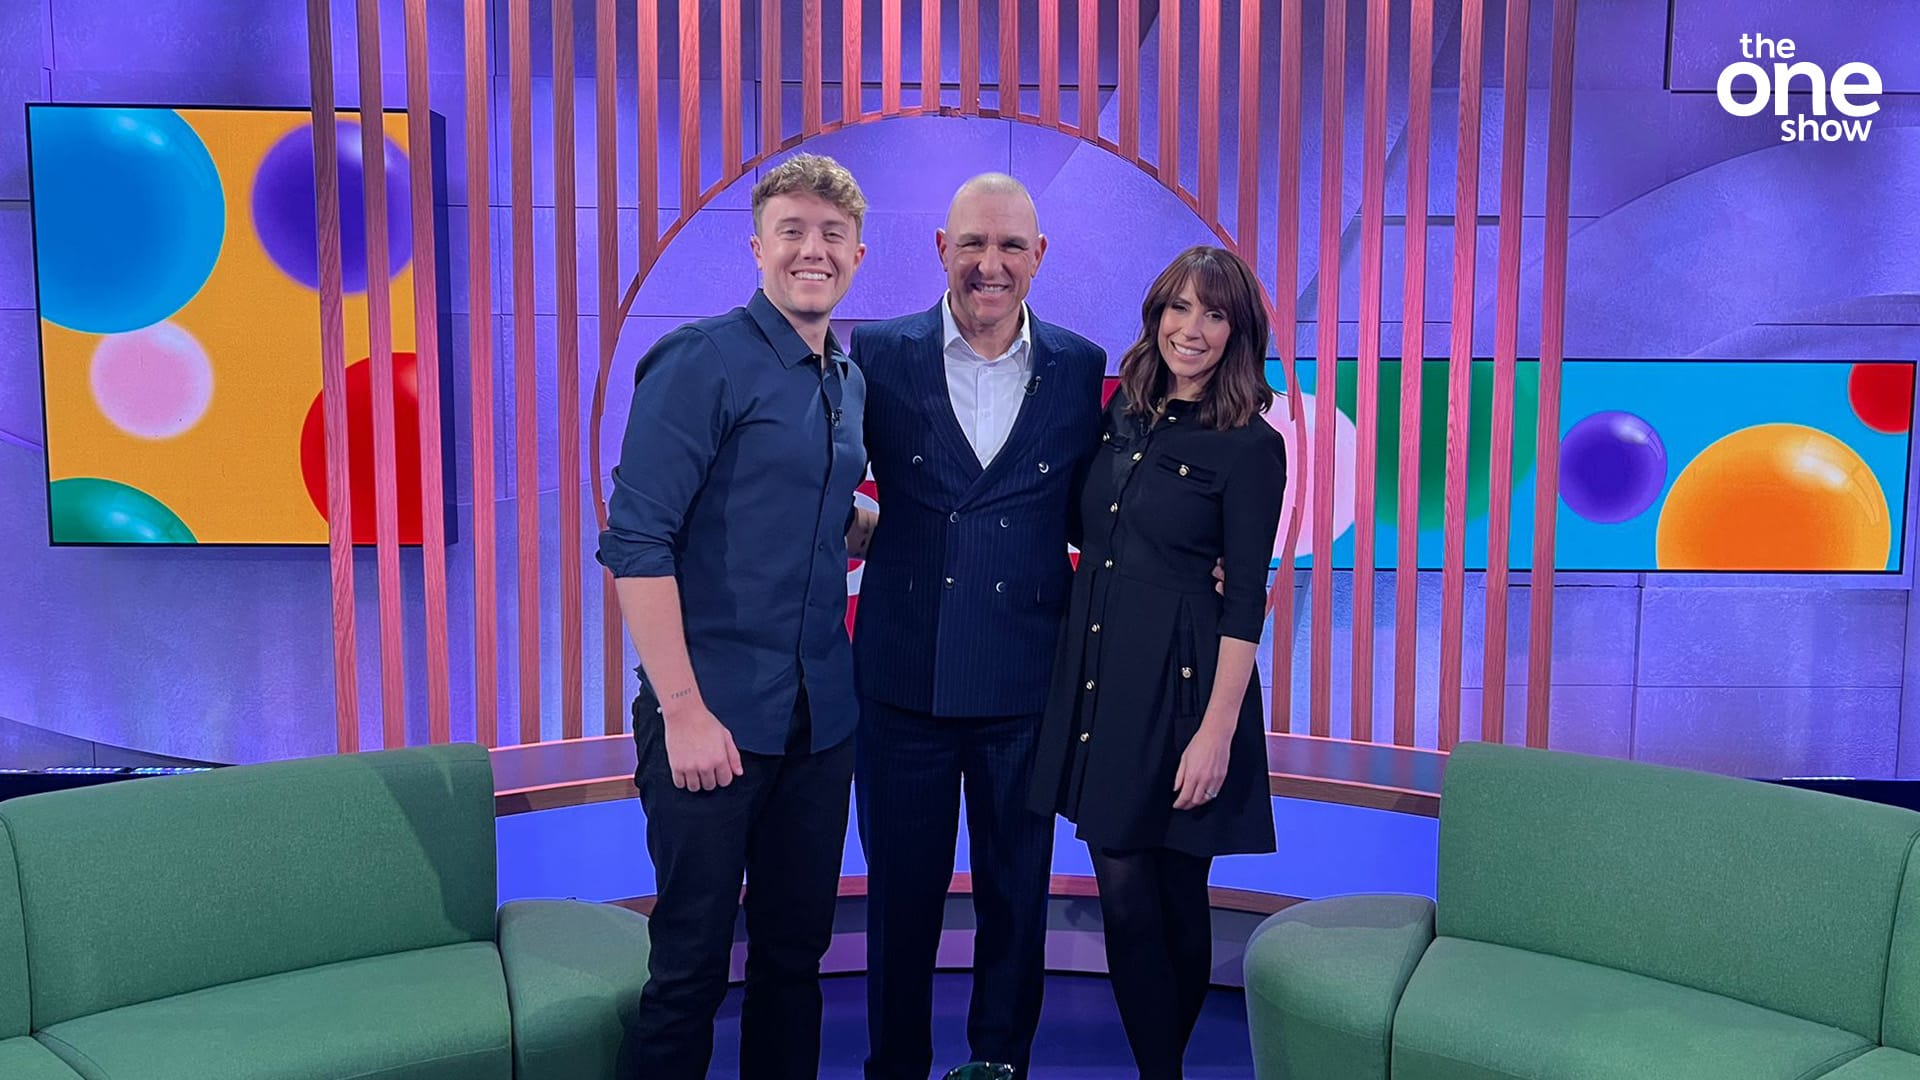 Vinnie Jones makes a guest appearance on The One Show to promote his new show Vinnie Jones In The Country